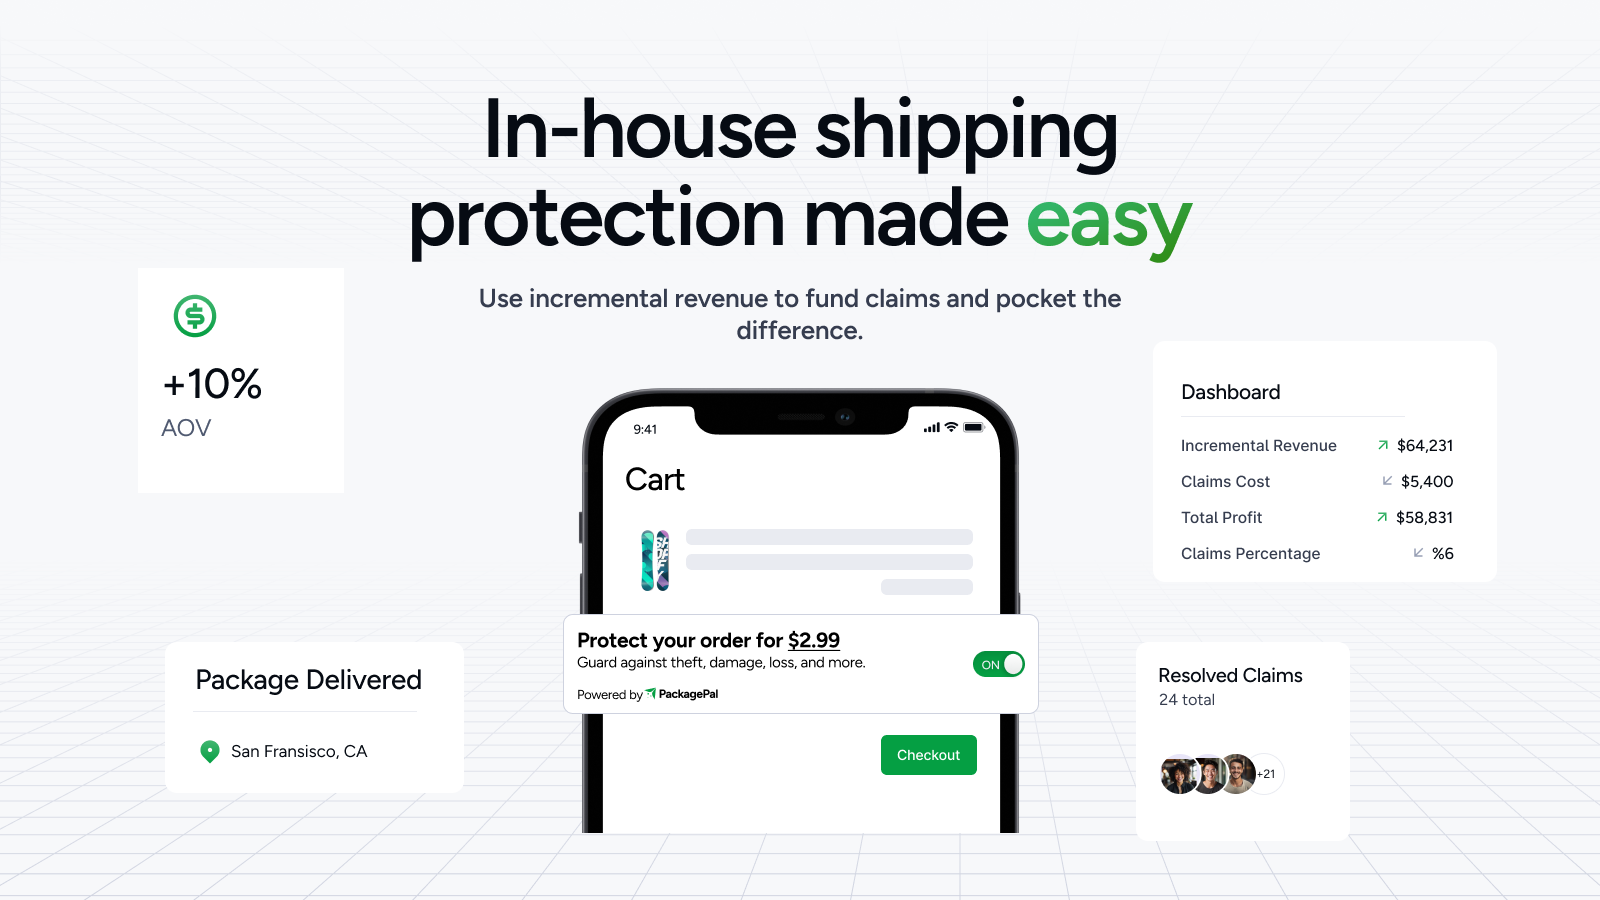 In-house shipping protection made easy.